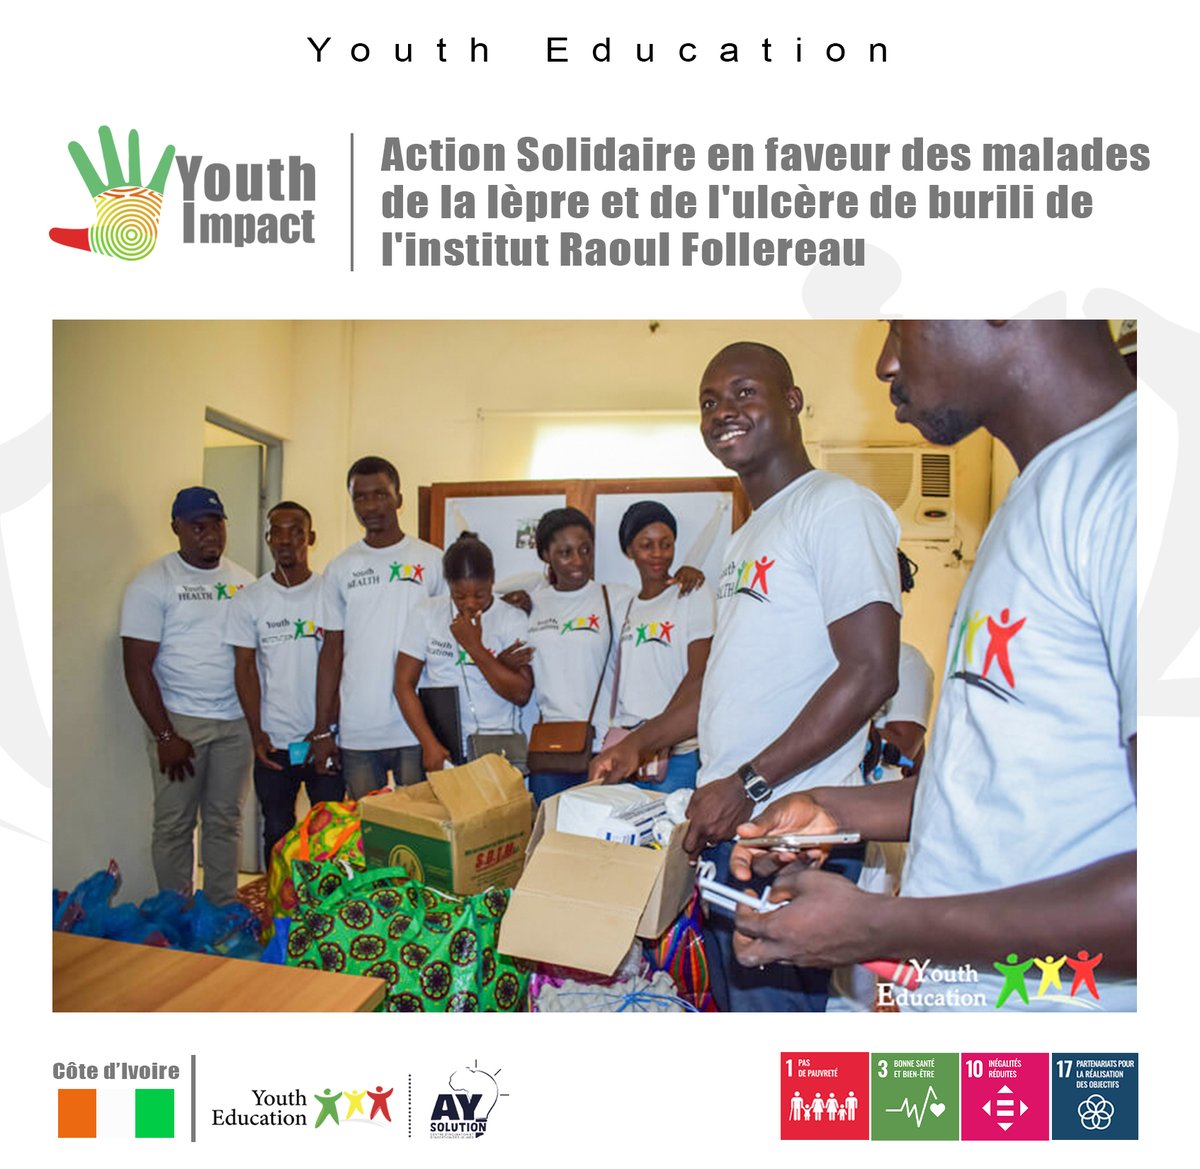 YOUTH IMPACT 

Read the article about this visit on the following link: urlz.fr/qtHU

𝗬𝗢𝗨𝗧𝗛 𝗘𝗗𝗨𝗖𝗔𝗧𝗜𝗢𝗡 𝗙𝗢𝗥 𝗔𝗙𝗥𝗜𝗖𝗔
𝗬𝗢𝗨𝗧𝗛 𝗘𝗠𝗣𝗟𝗢𝗬𝗔𝗕𝗜𝗟𝗜𝗧𝗬 𝗜𝗡 𝗔𝗙𝗥𝗜𝗖𝗔
#YouthEducation #EngagementCitoyen #ulceredeburuli #institutraoulfollereau